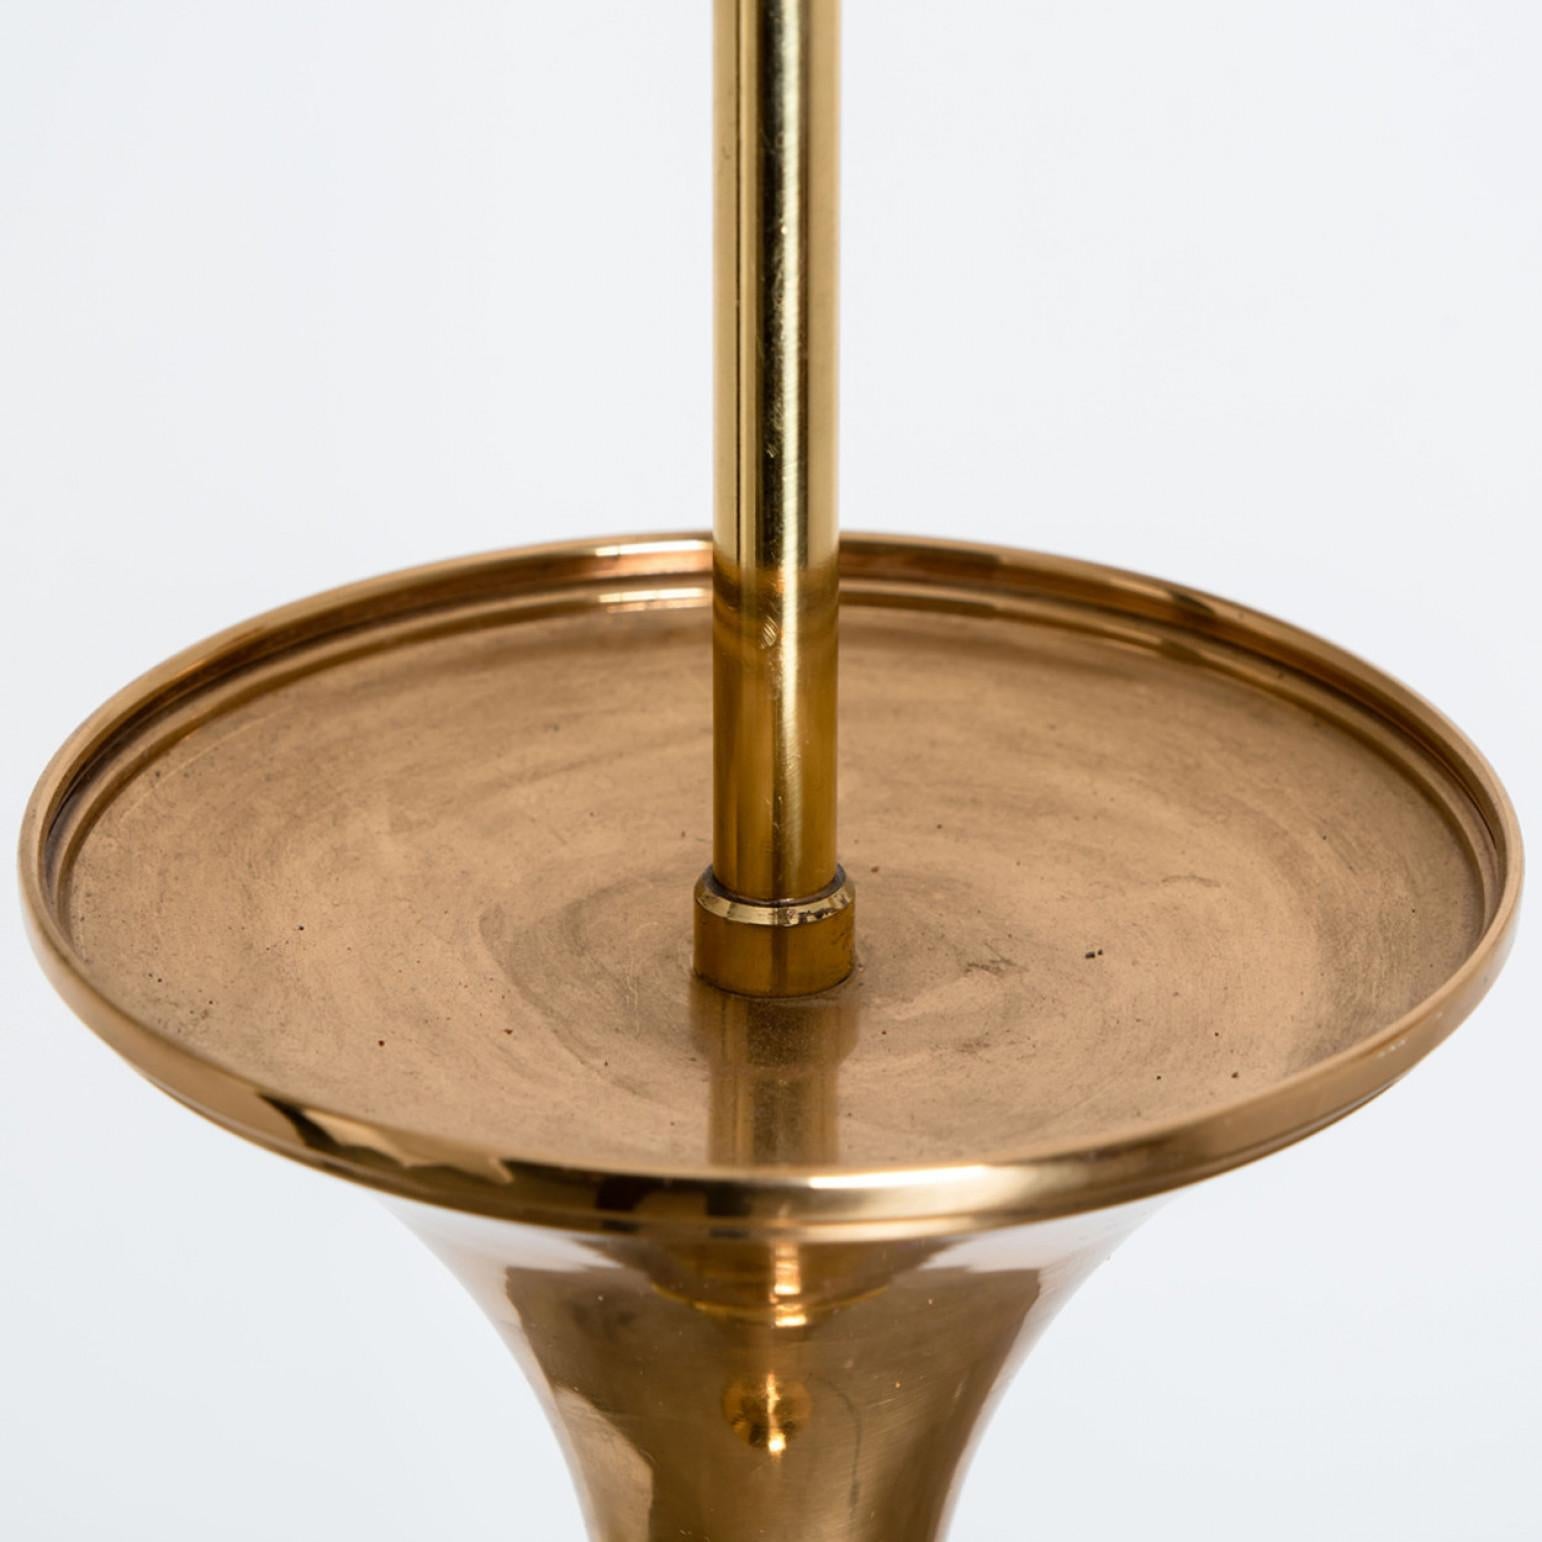 Other Pair of floor Lamps Gold Brass and Wood by Ingo Maurer, Europe, Germany, 1968 For Sale